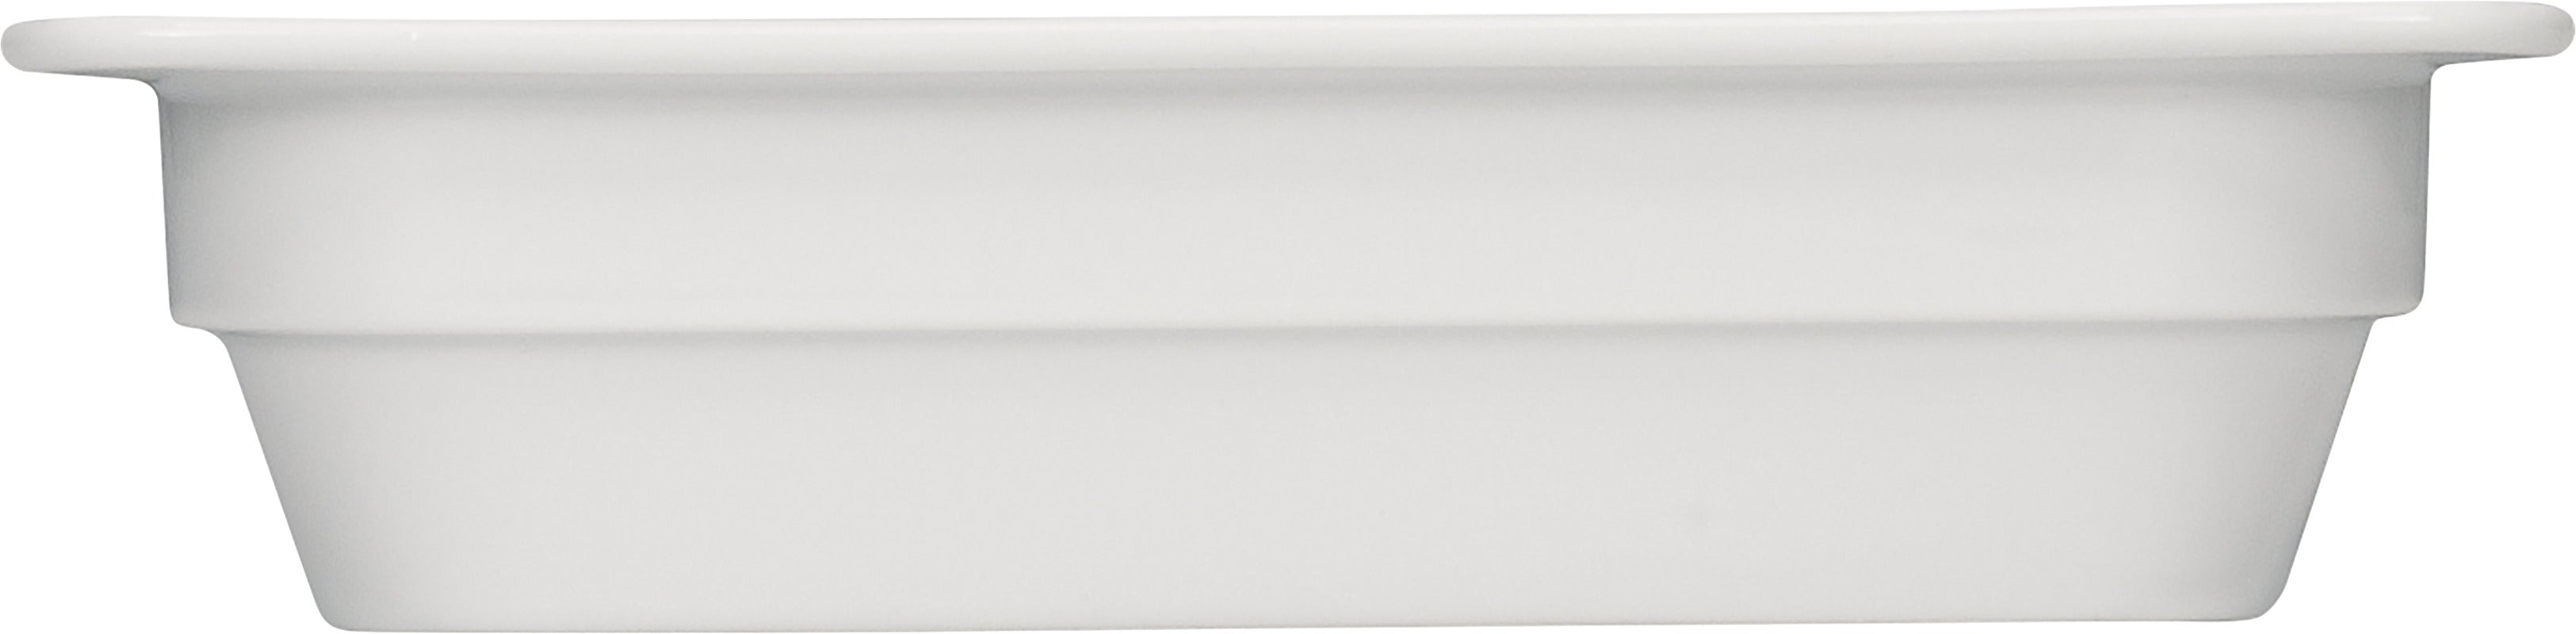 White Gastronorm Tray 10.4